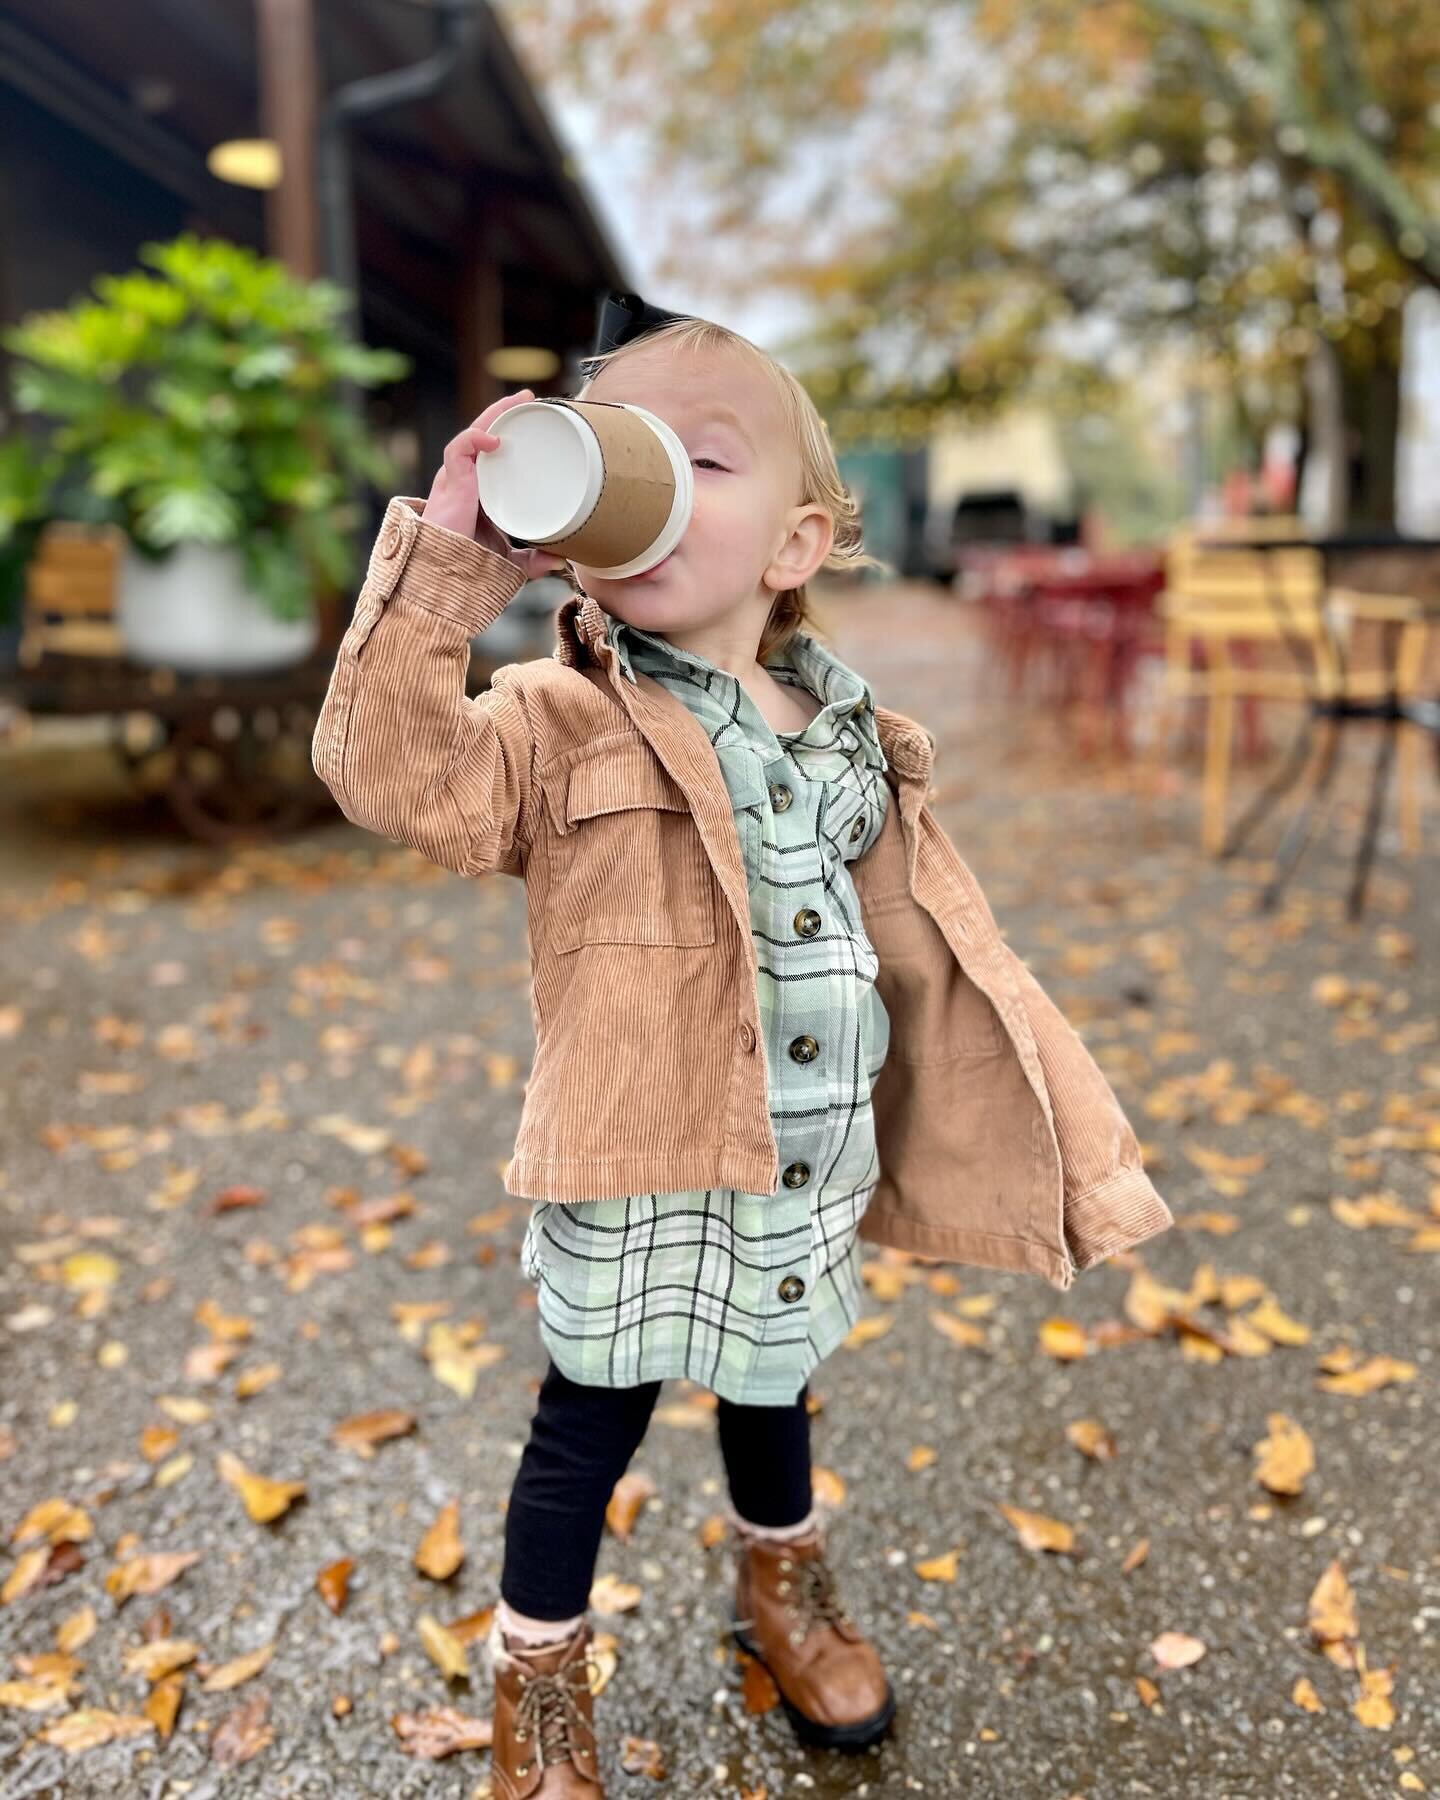 Happy Thanksgiving Eve! Stop by and get fueled up to run all those holiday errands. 

#southerngirlcoffecompany #southerngirlcoffeekids #alleycoffeeshop